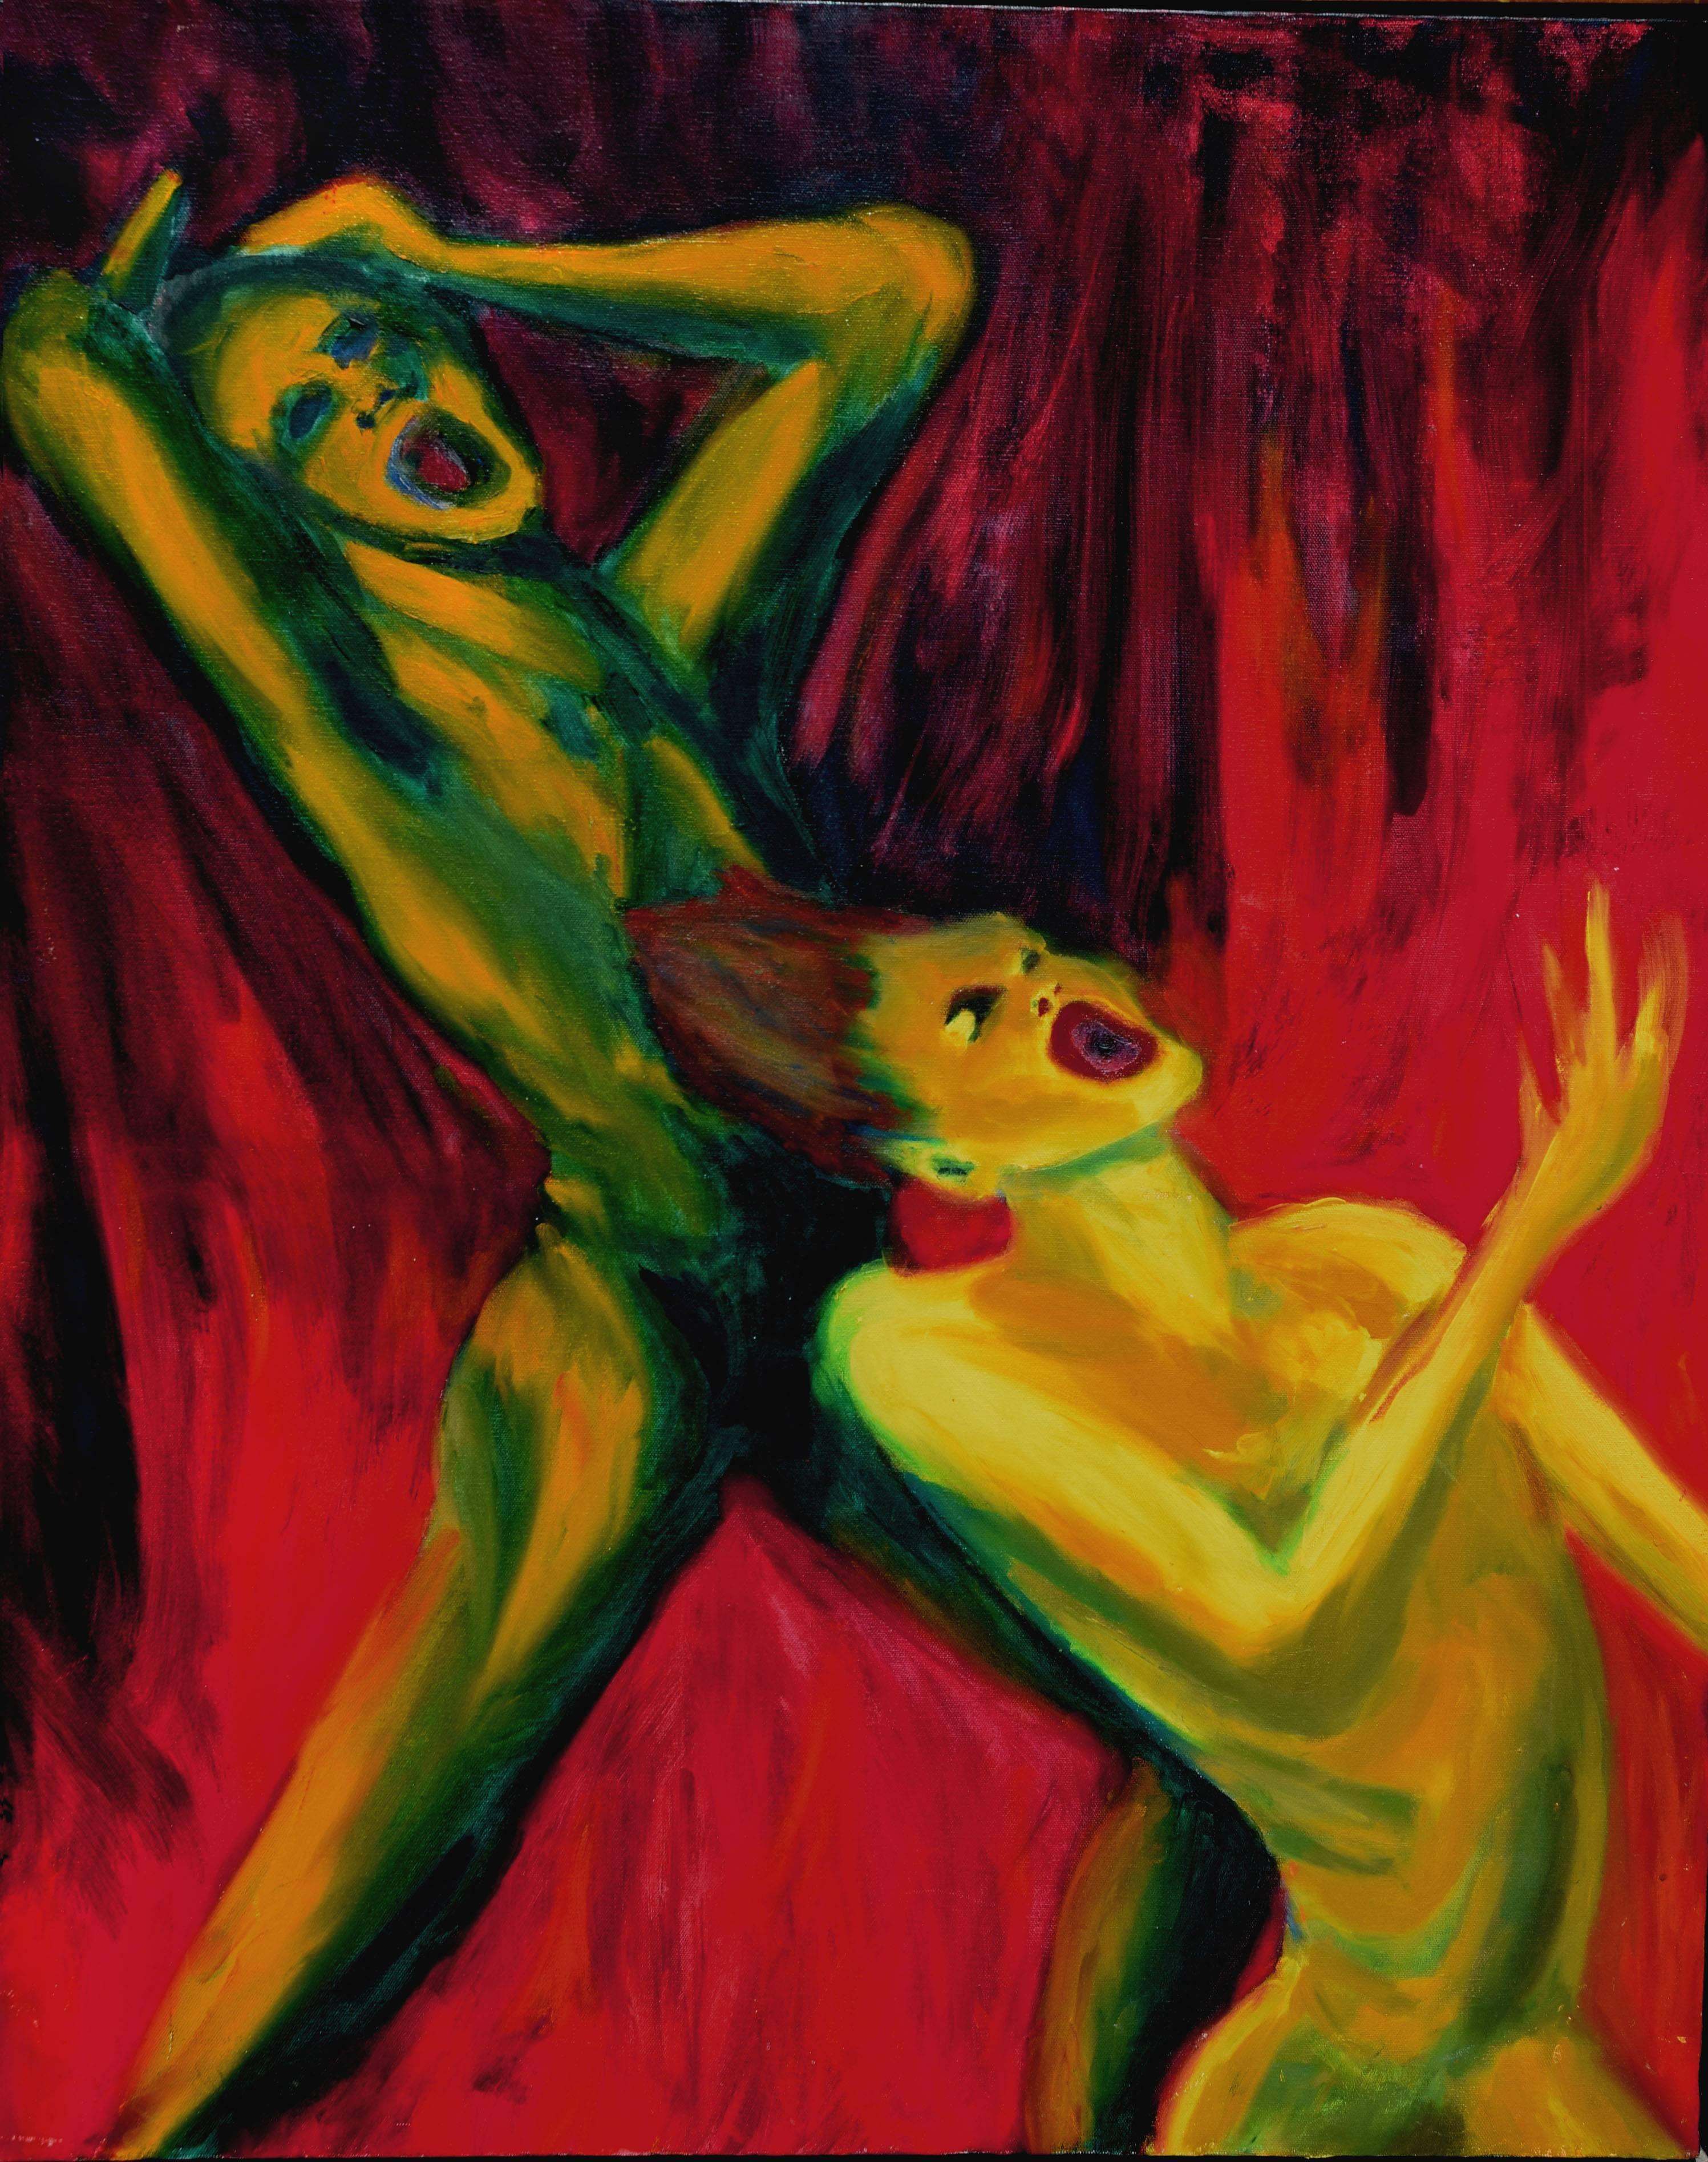  L'enfer de deux - Abstract Figurative  - Painting by J. Gregory